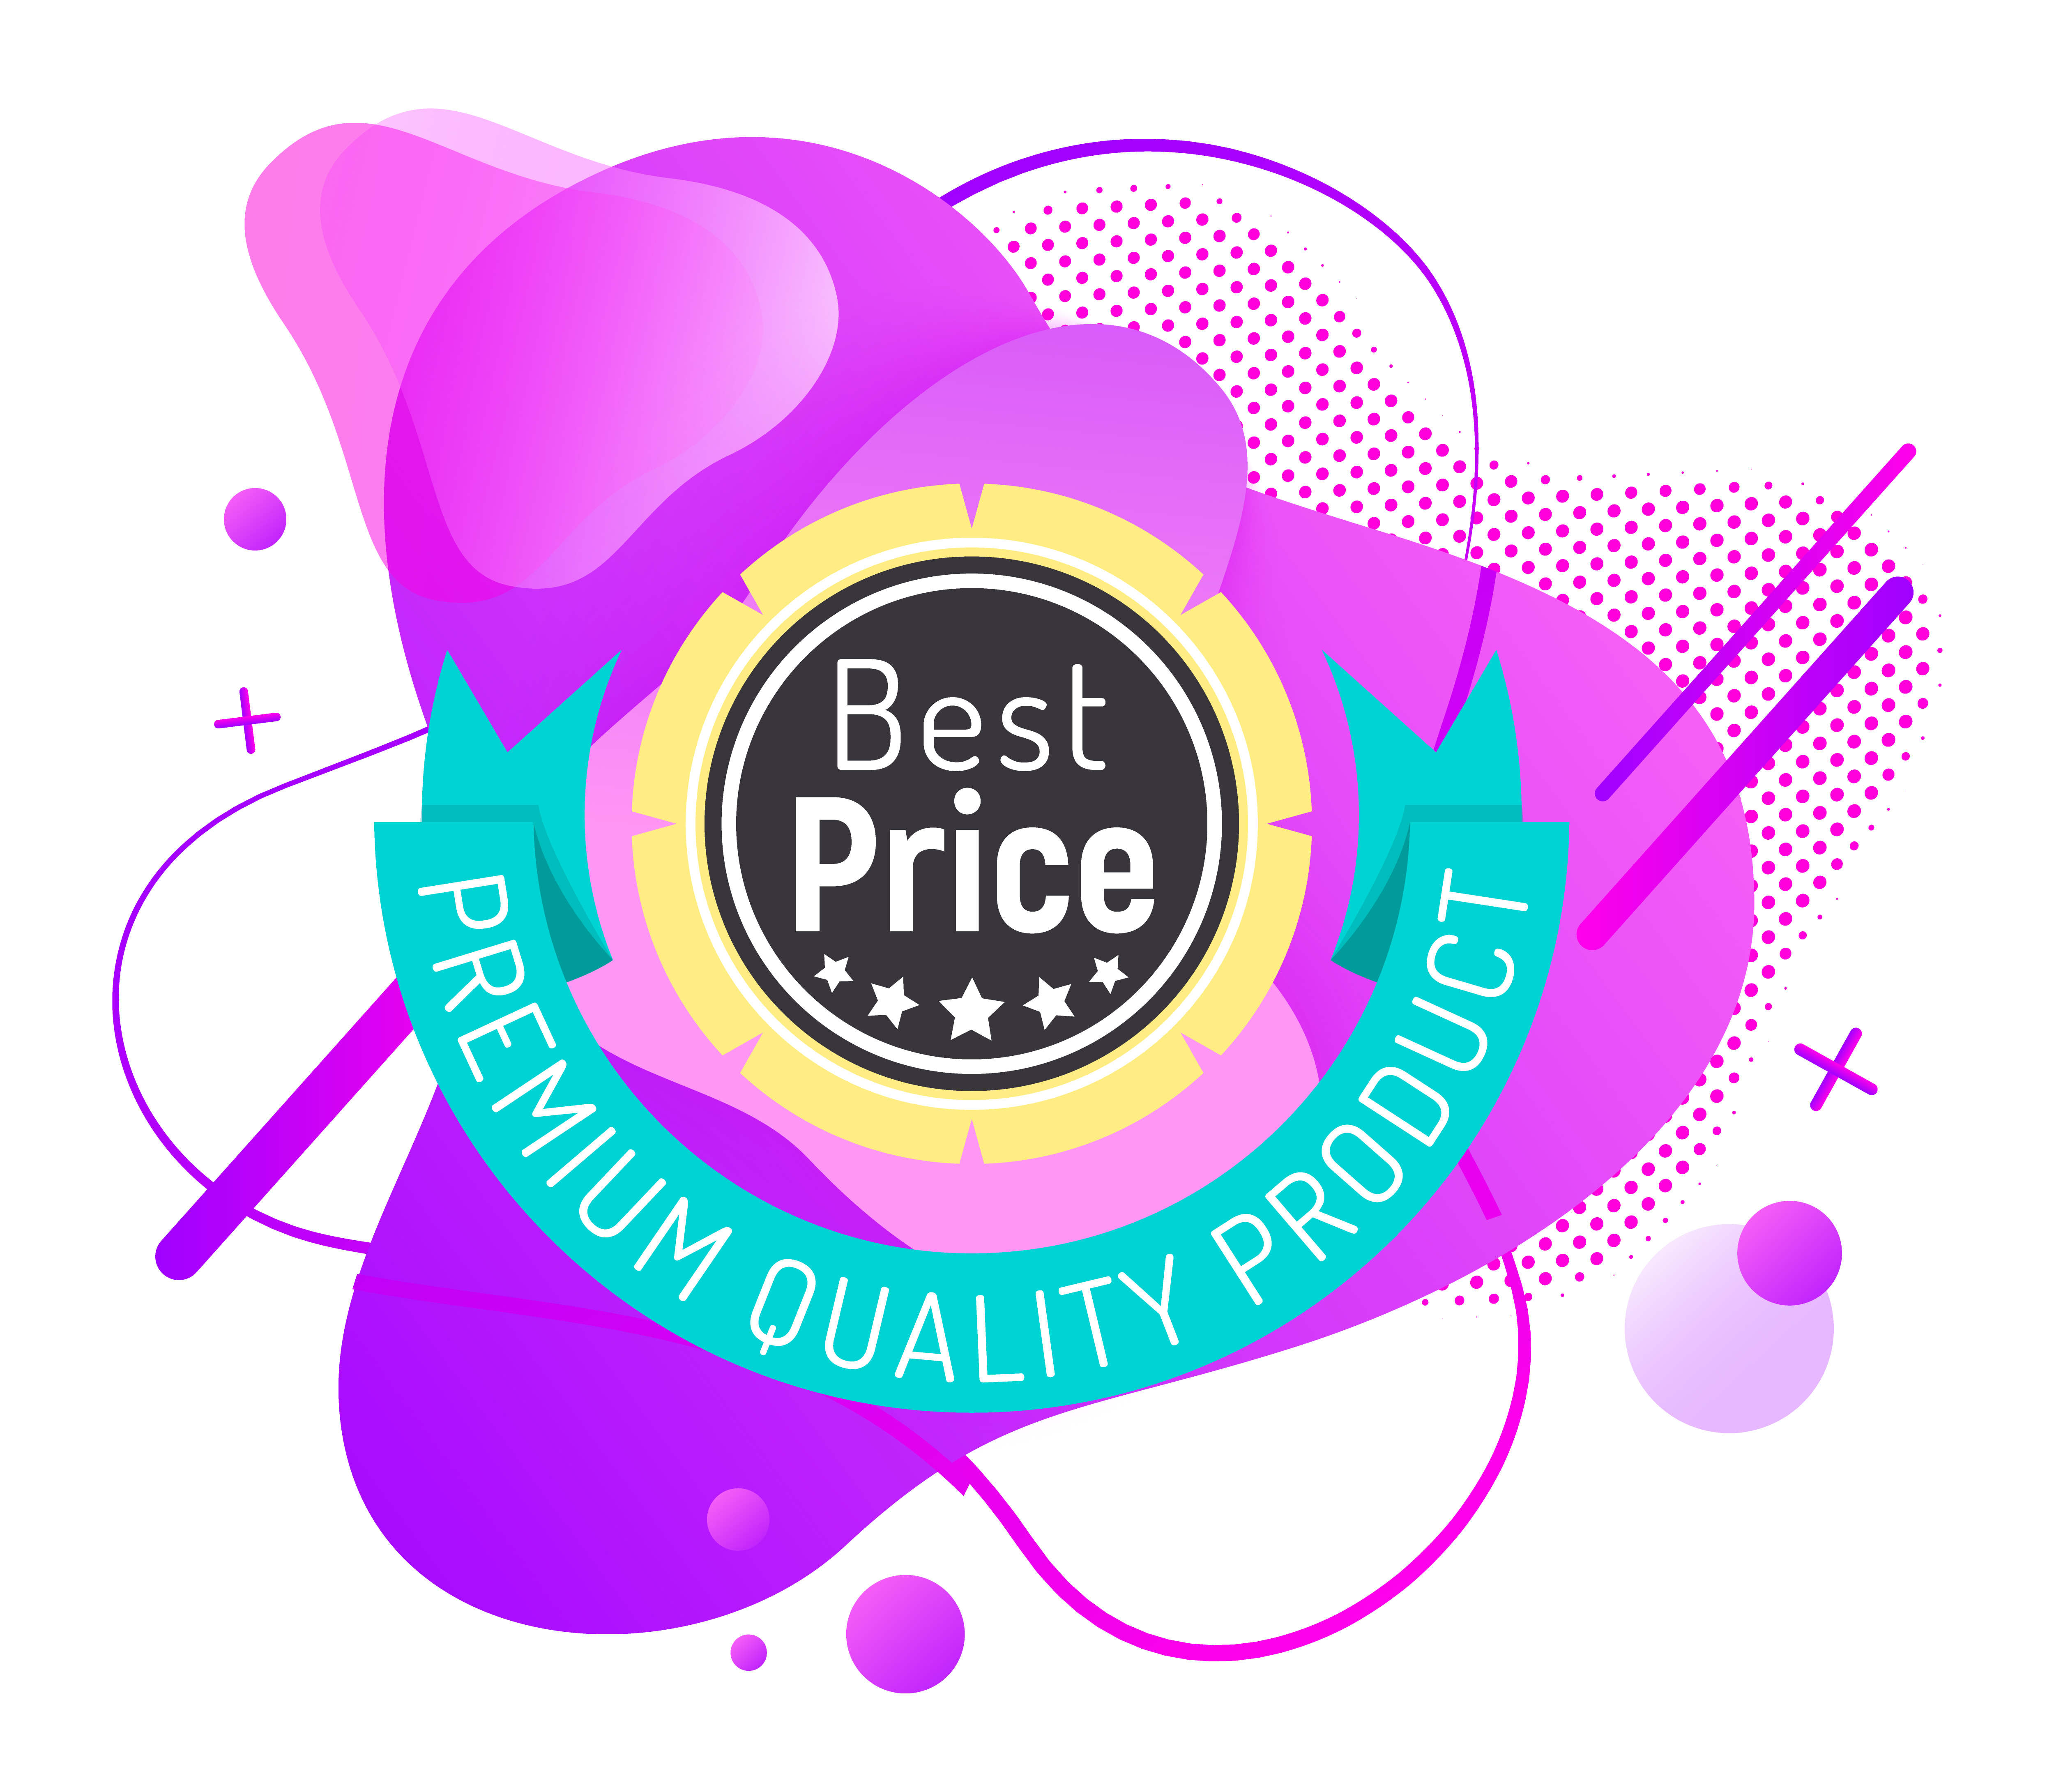 Best price circle label on purple liquid shape isolated on white. Advertising shopping guarantee icon with frame decorated by star symbols. Special promotion round emblem with ribbon symbol vector. Advertising Label Best Price Liquid Shape Vector